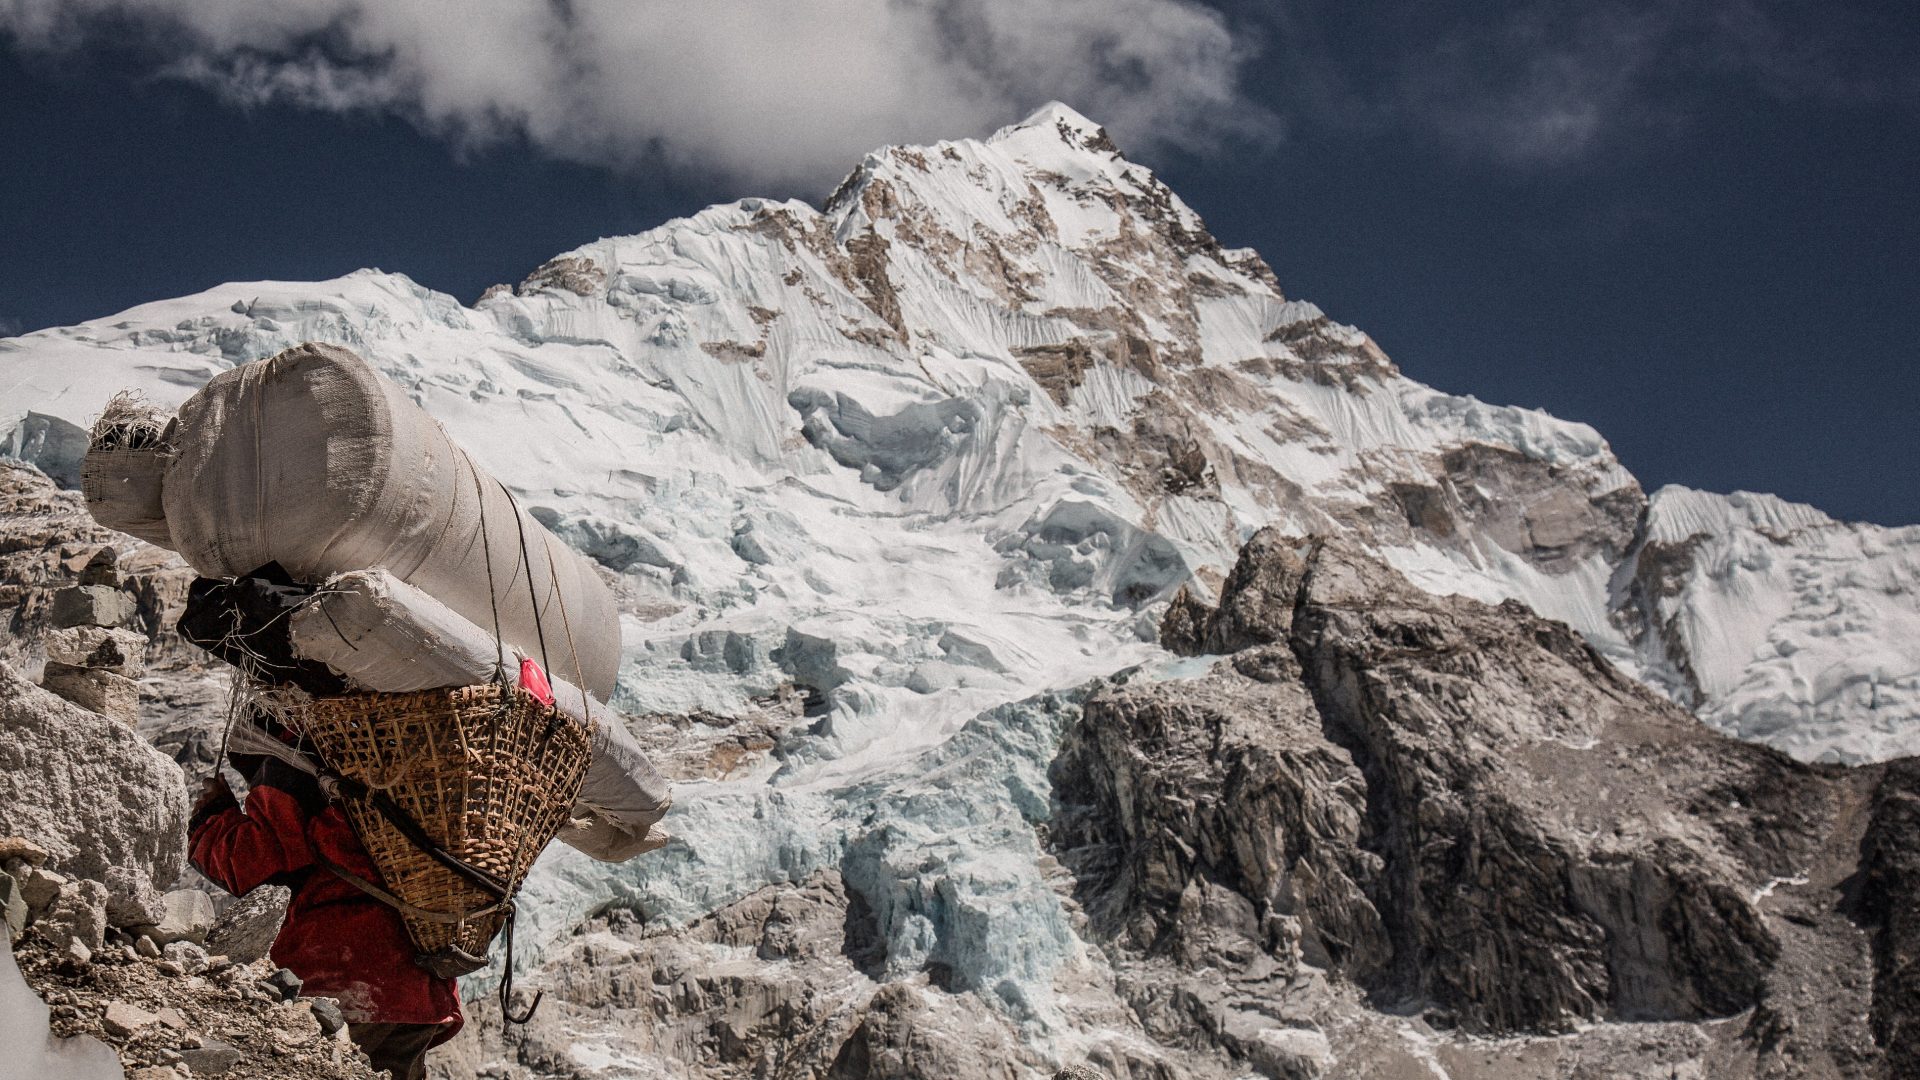 Triumph, tragedy and climate change: Telling the stories of the Sherpas of Everest